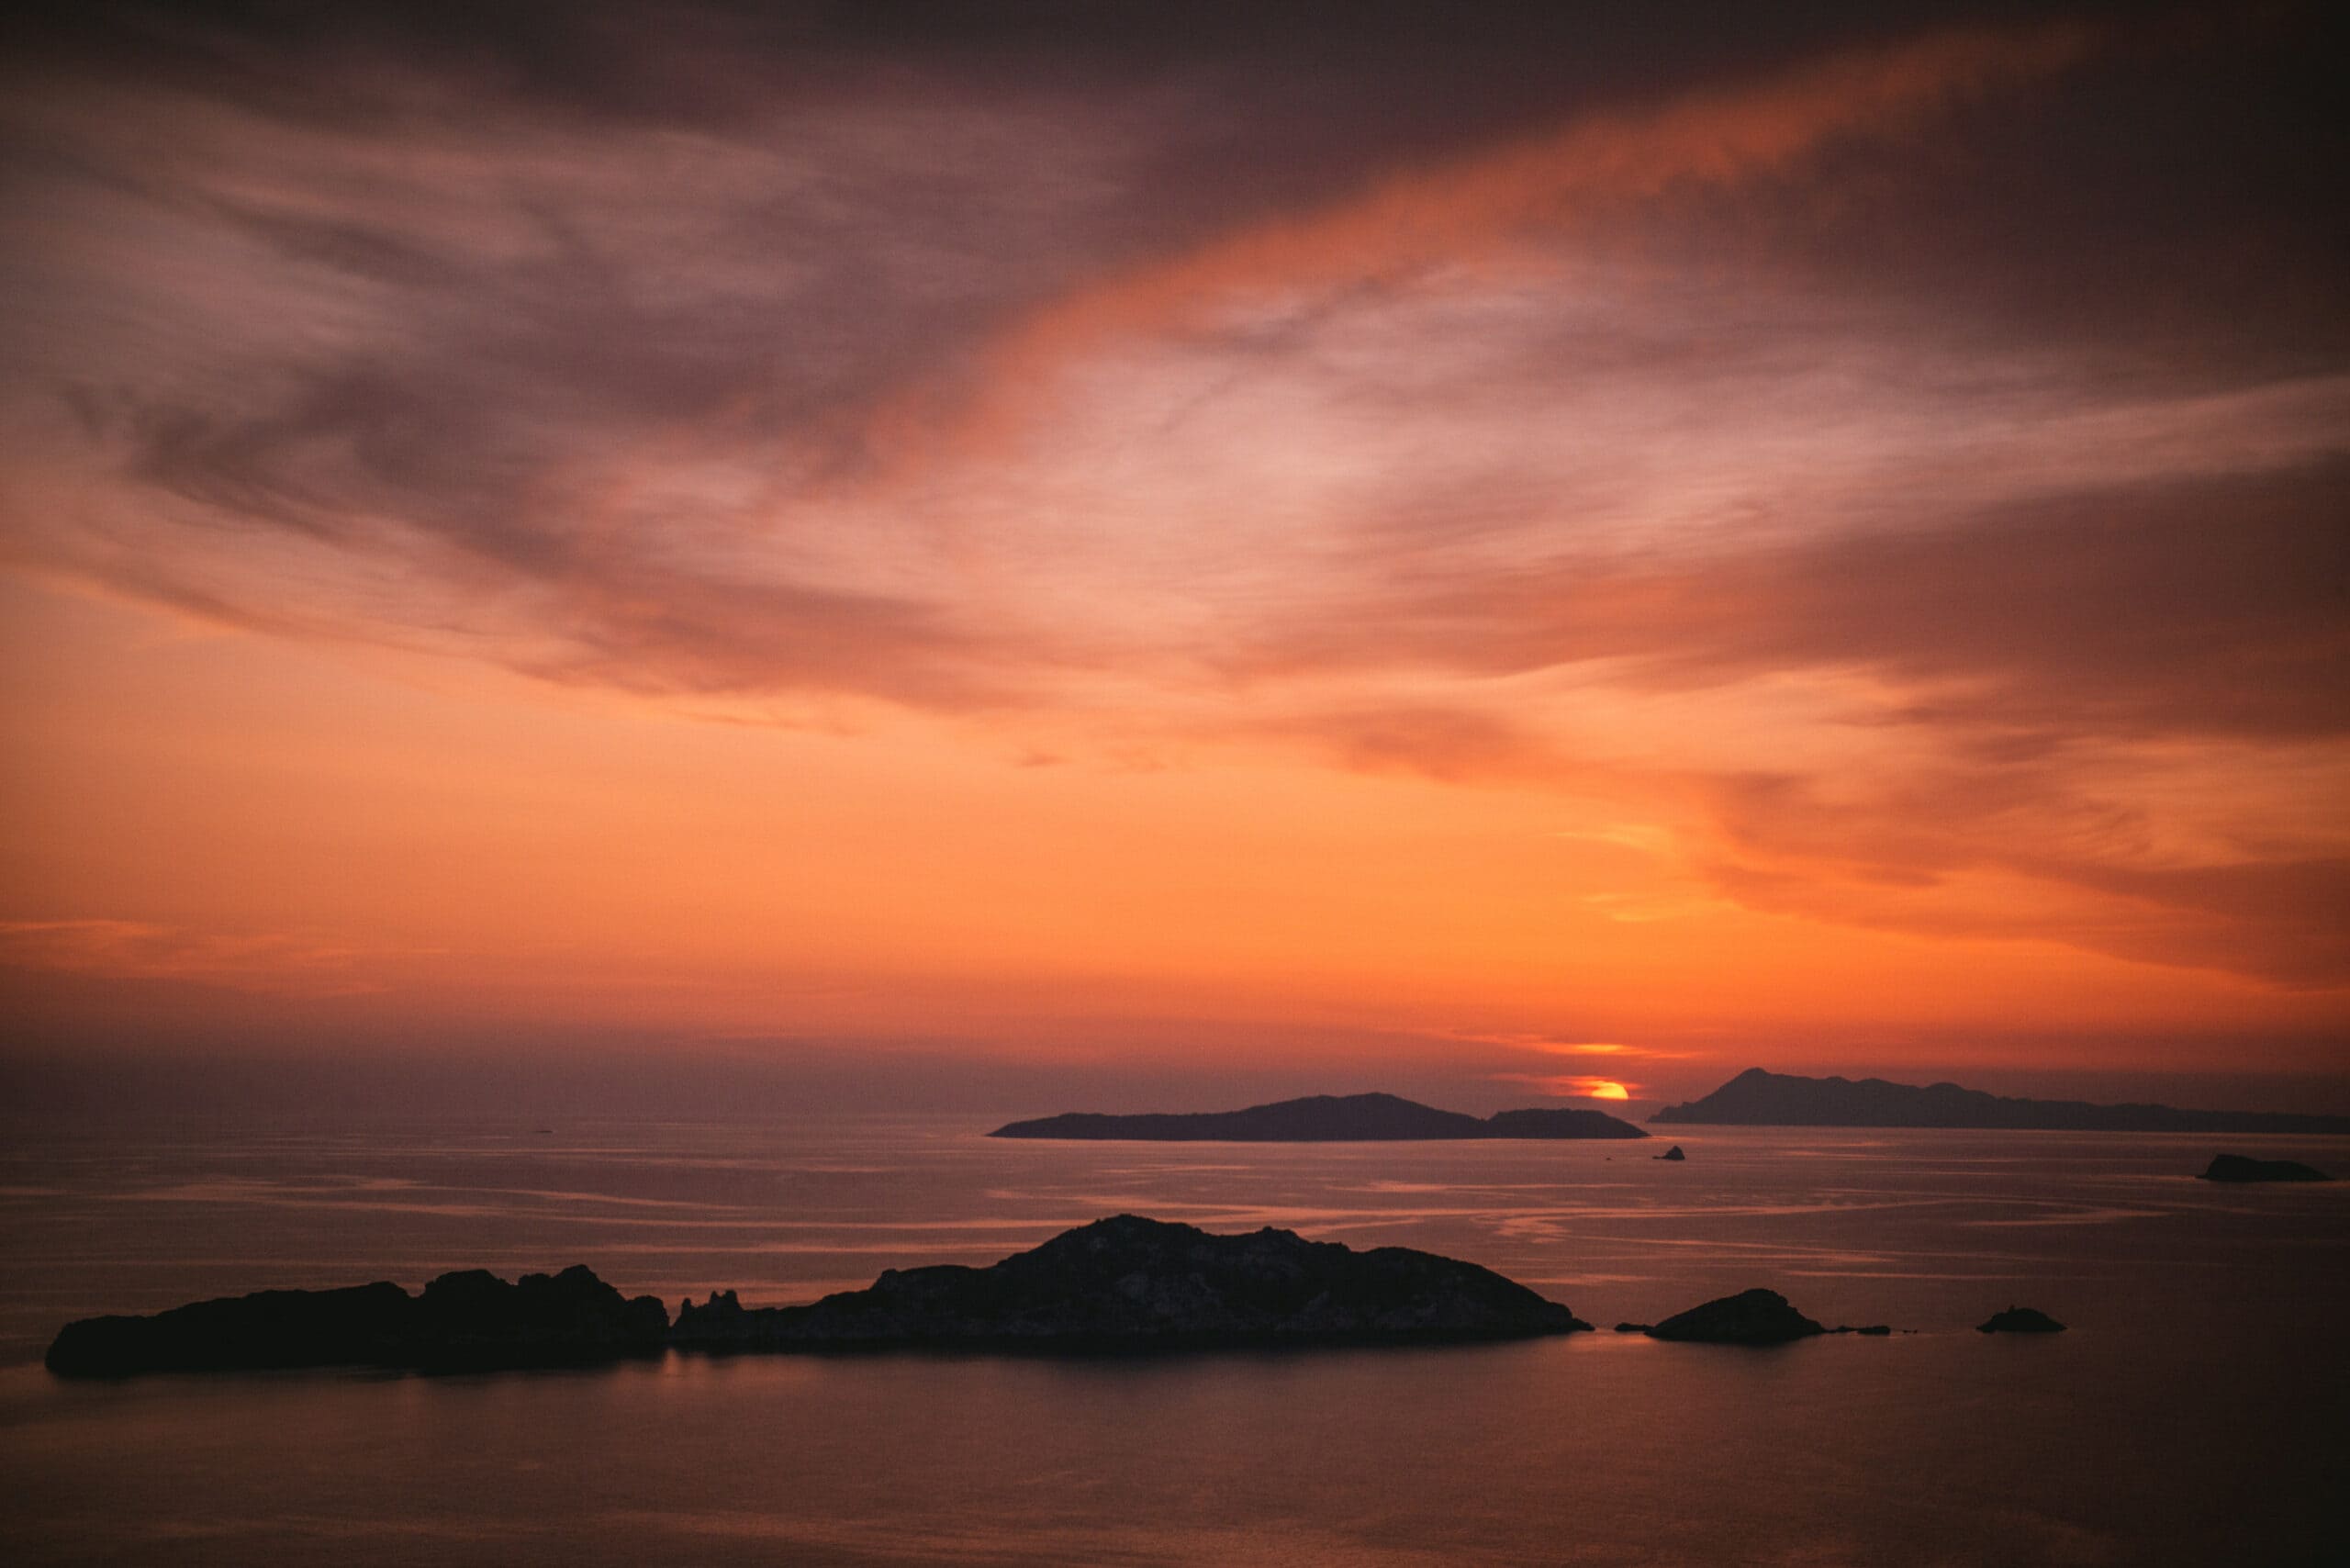 Breathtaking sunset over the stunning Corfu islands, capturing the magic of their elopement.